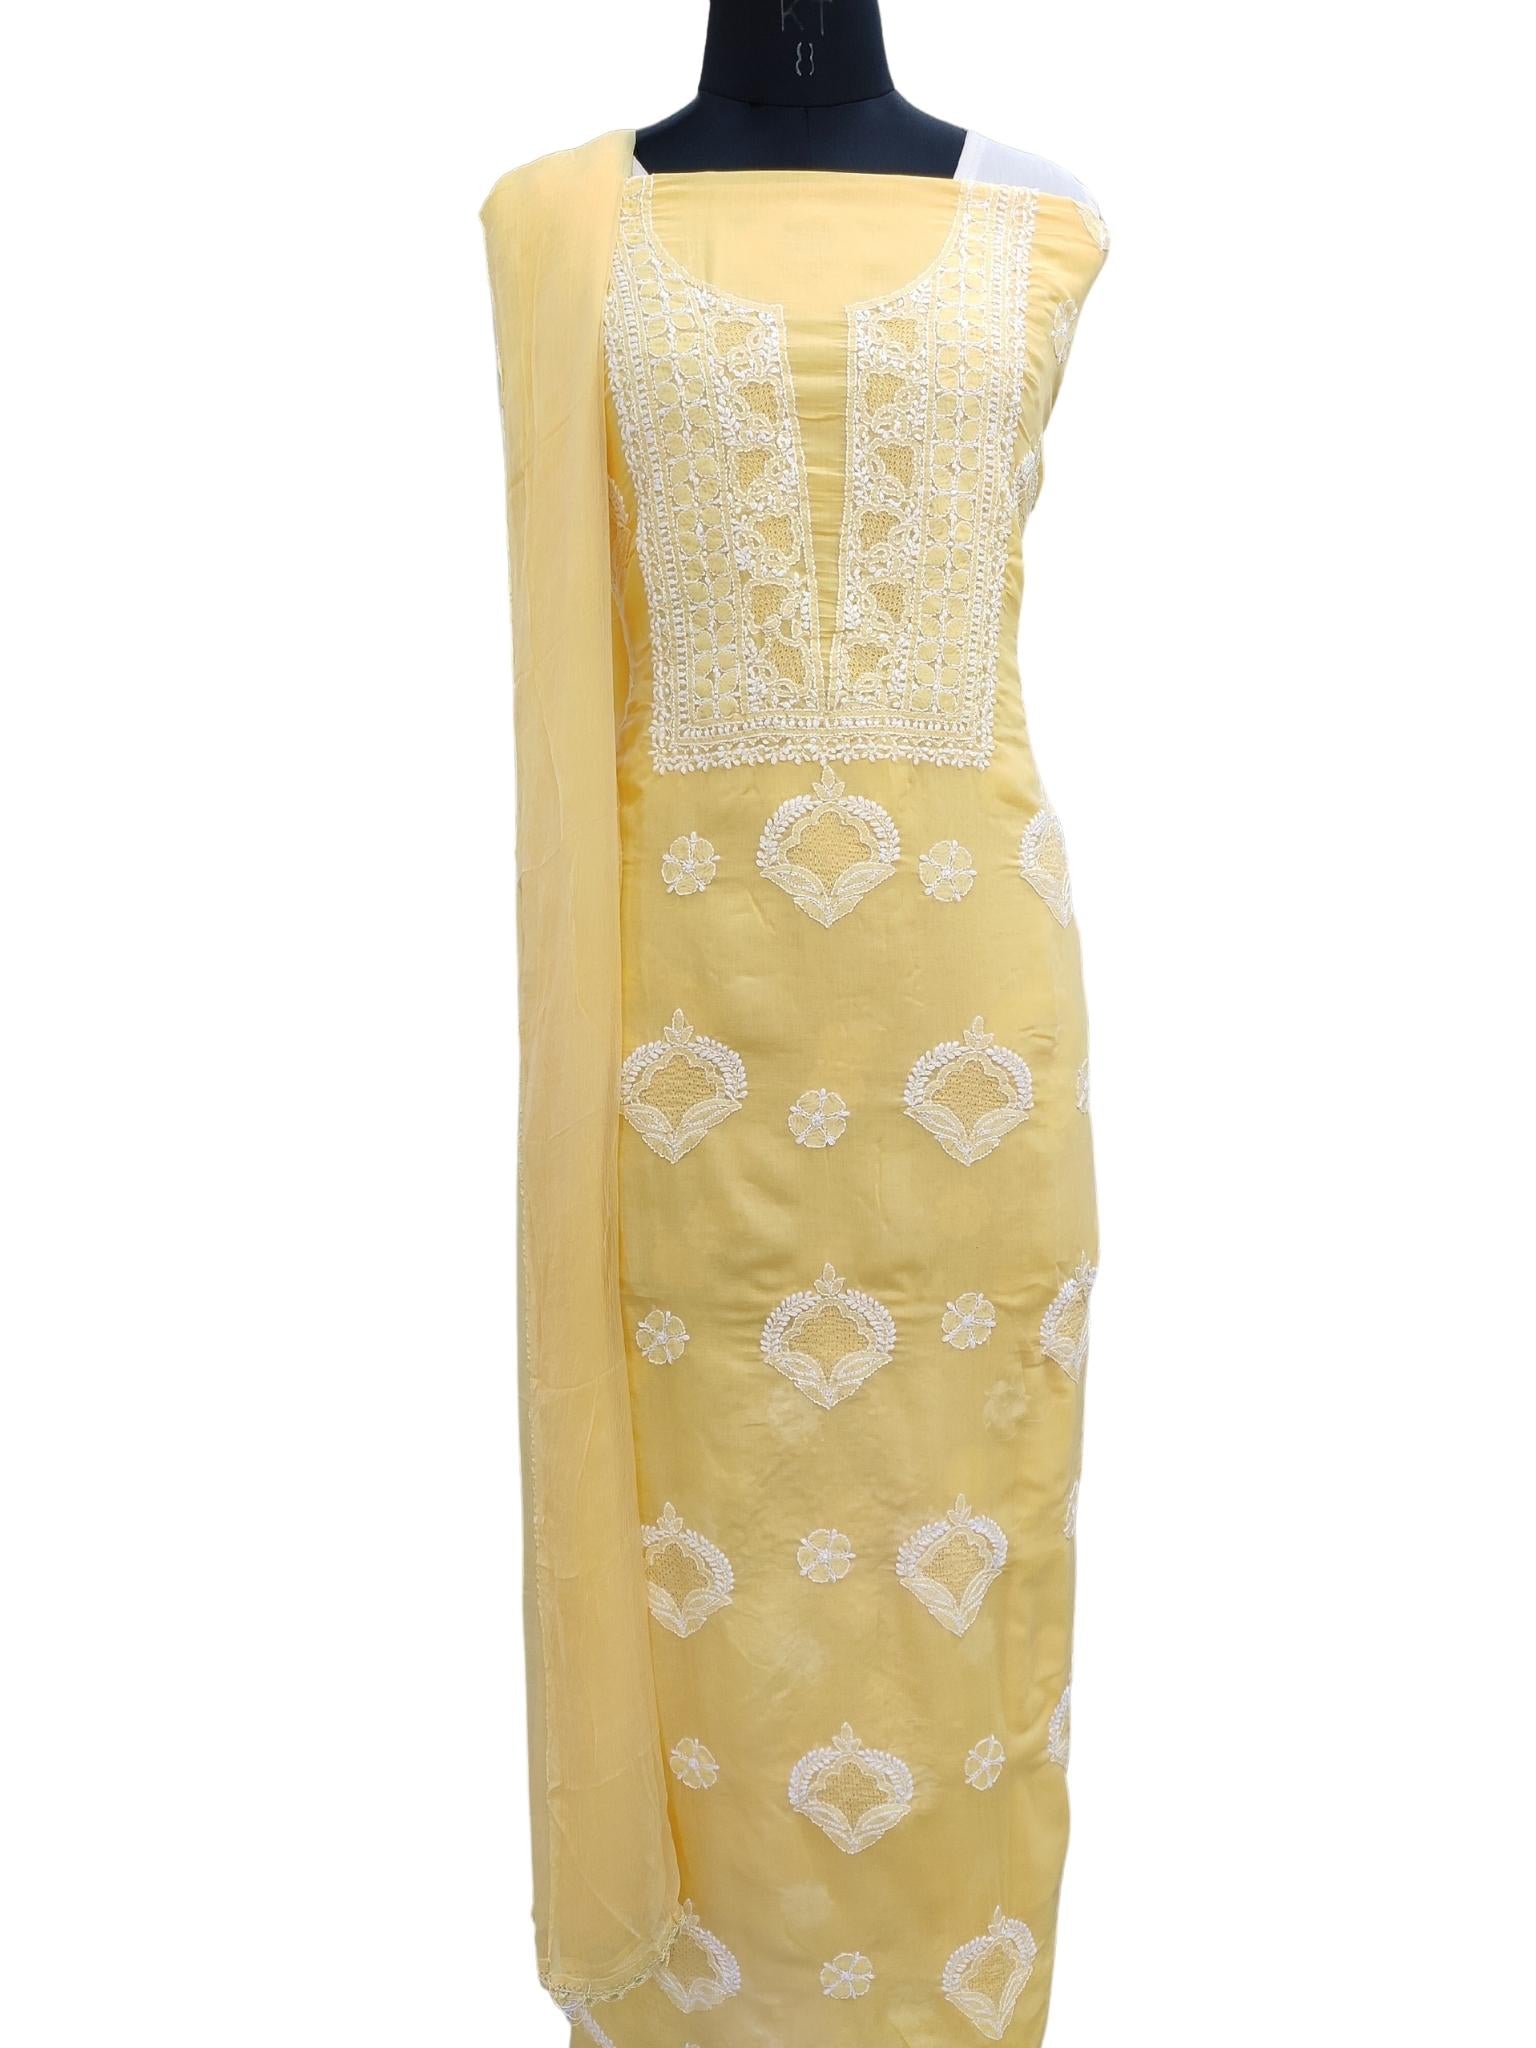 Shyamal Chikan Hand Embroidered Yellow Cotton All-Over Lucknowi Chikankari Unstitched Suit Piece With Jaali Work - S18216